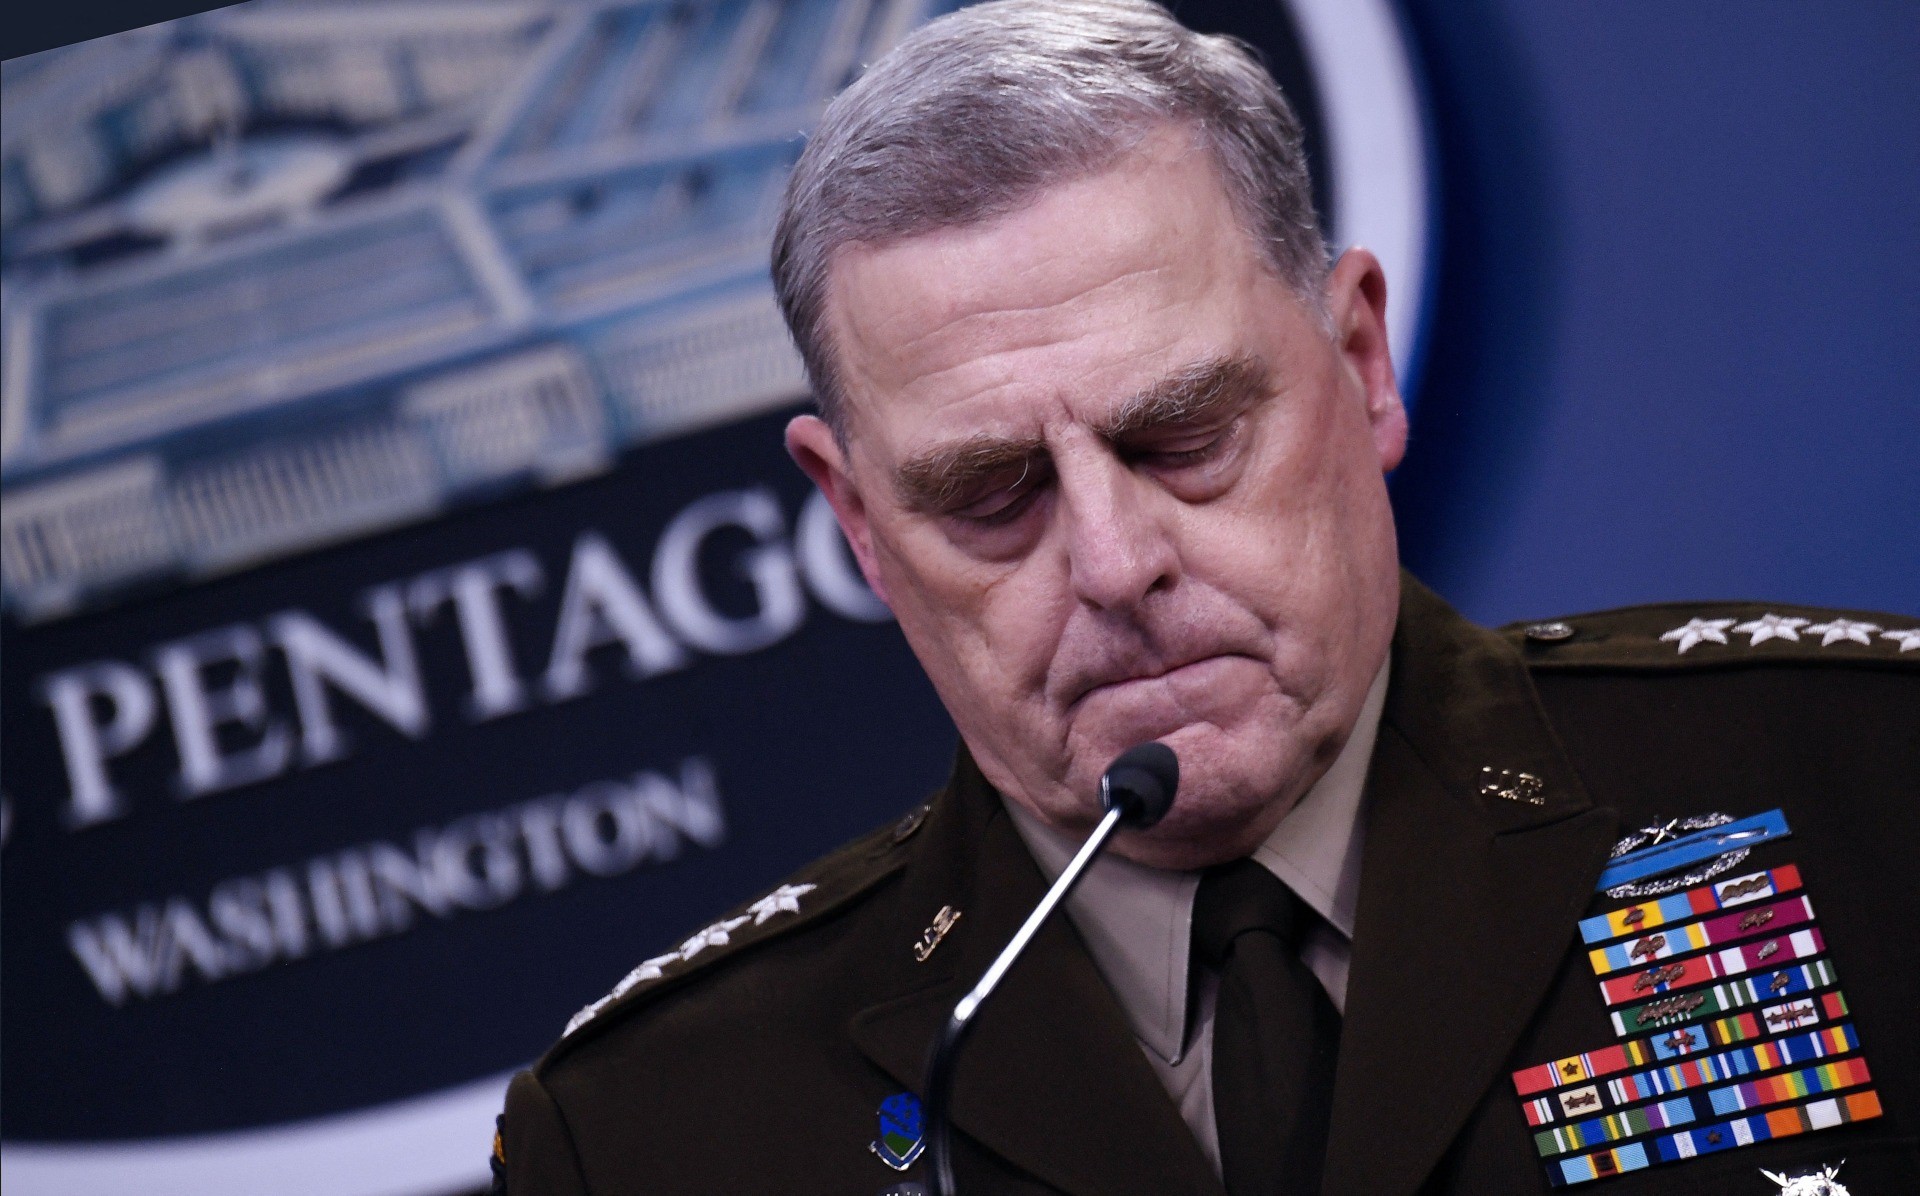 Chairman of the Joint Chiefs of Staff, General Mark Milley, speaks during a press conference about the situation in Afghanistan on August 18, 2021, at The Pentagon in Washington, DC. - Austin said Wednesday that US forces would evacuate as many people as possible from the Kabul airport as thousands pressed to leave after the Taliban takeover of the country. (Photo by Olivier DOULIERY / AFP) (Photo by OLIVIER DOULIERY/AFP via Getty Images)